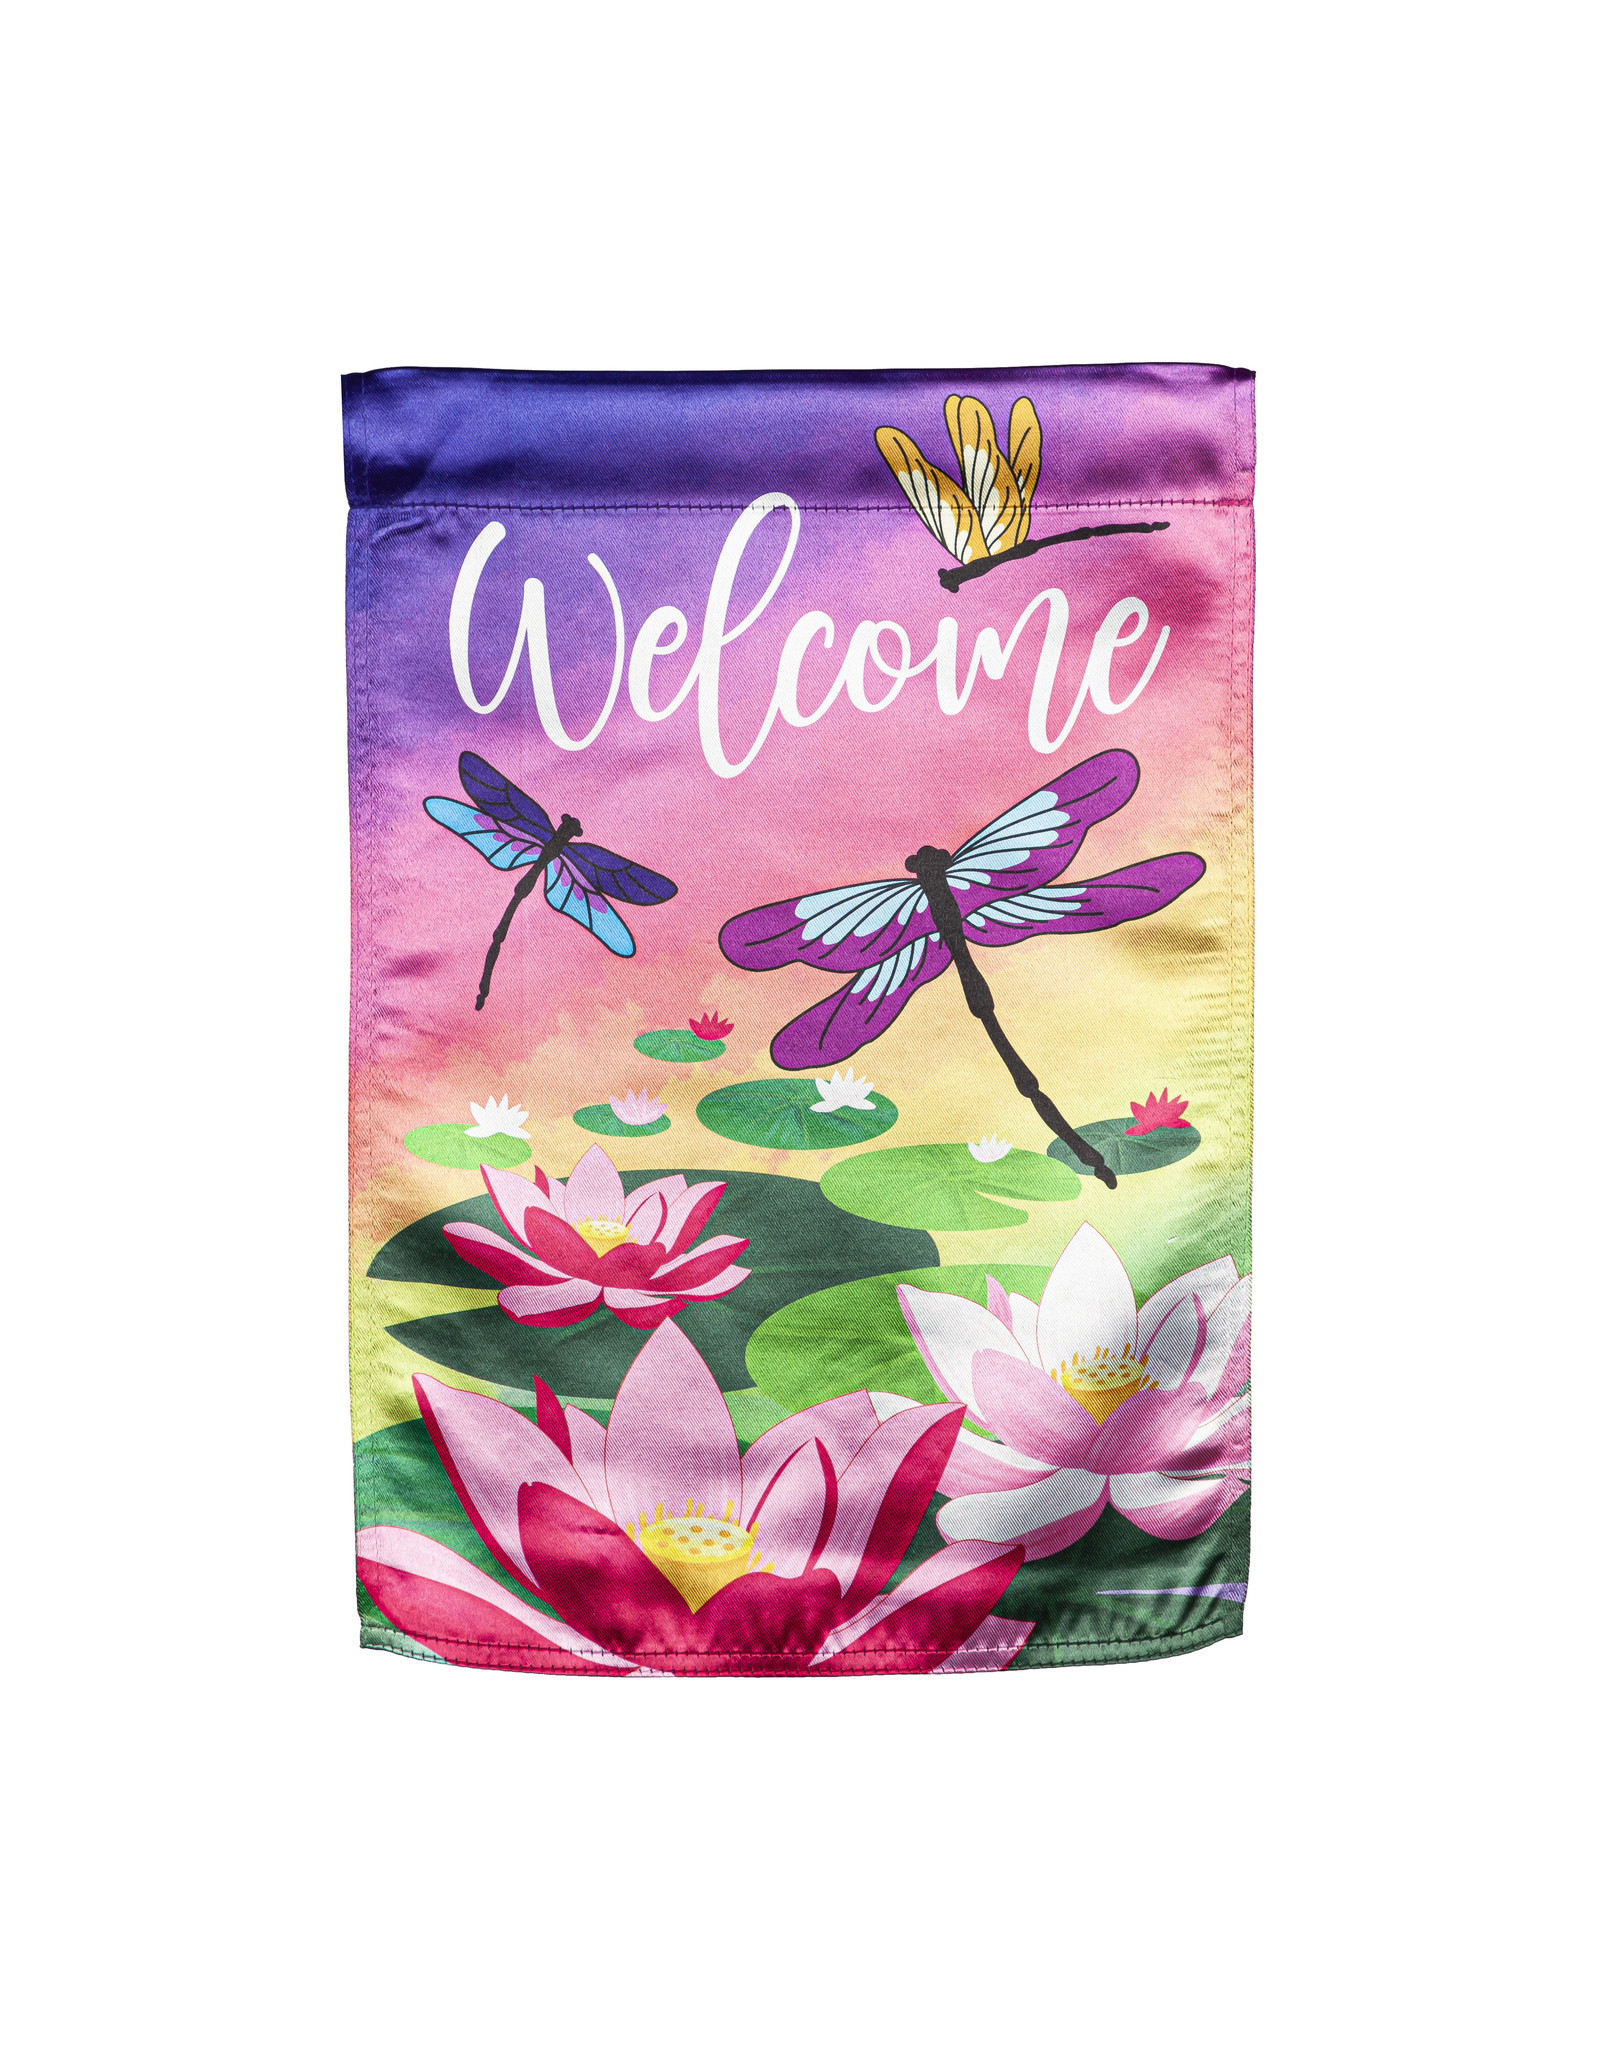 Evergreen Enterprises Welcome Dragonfly with Lily Pads Garden Lustre Flag